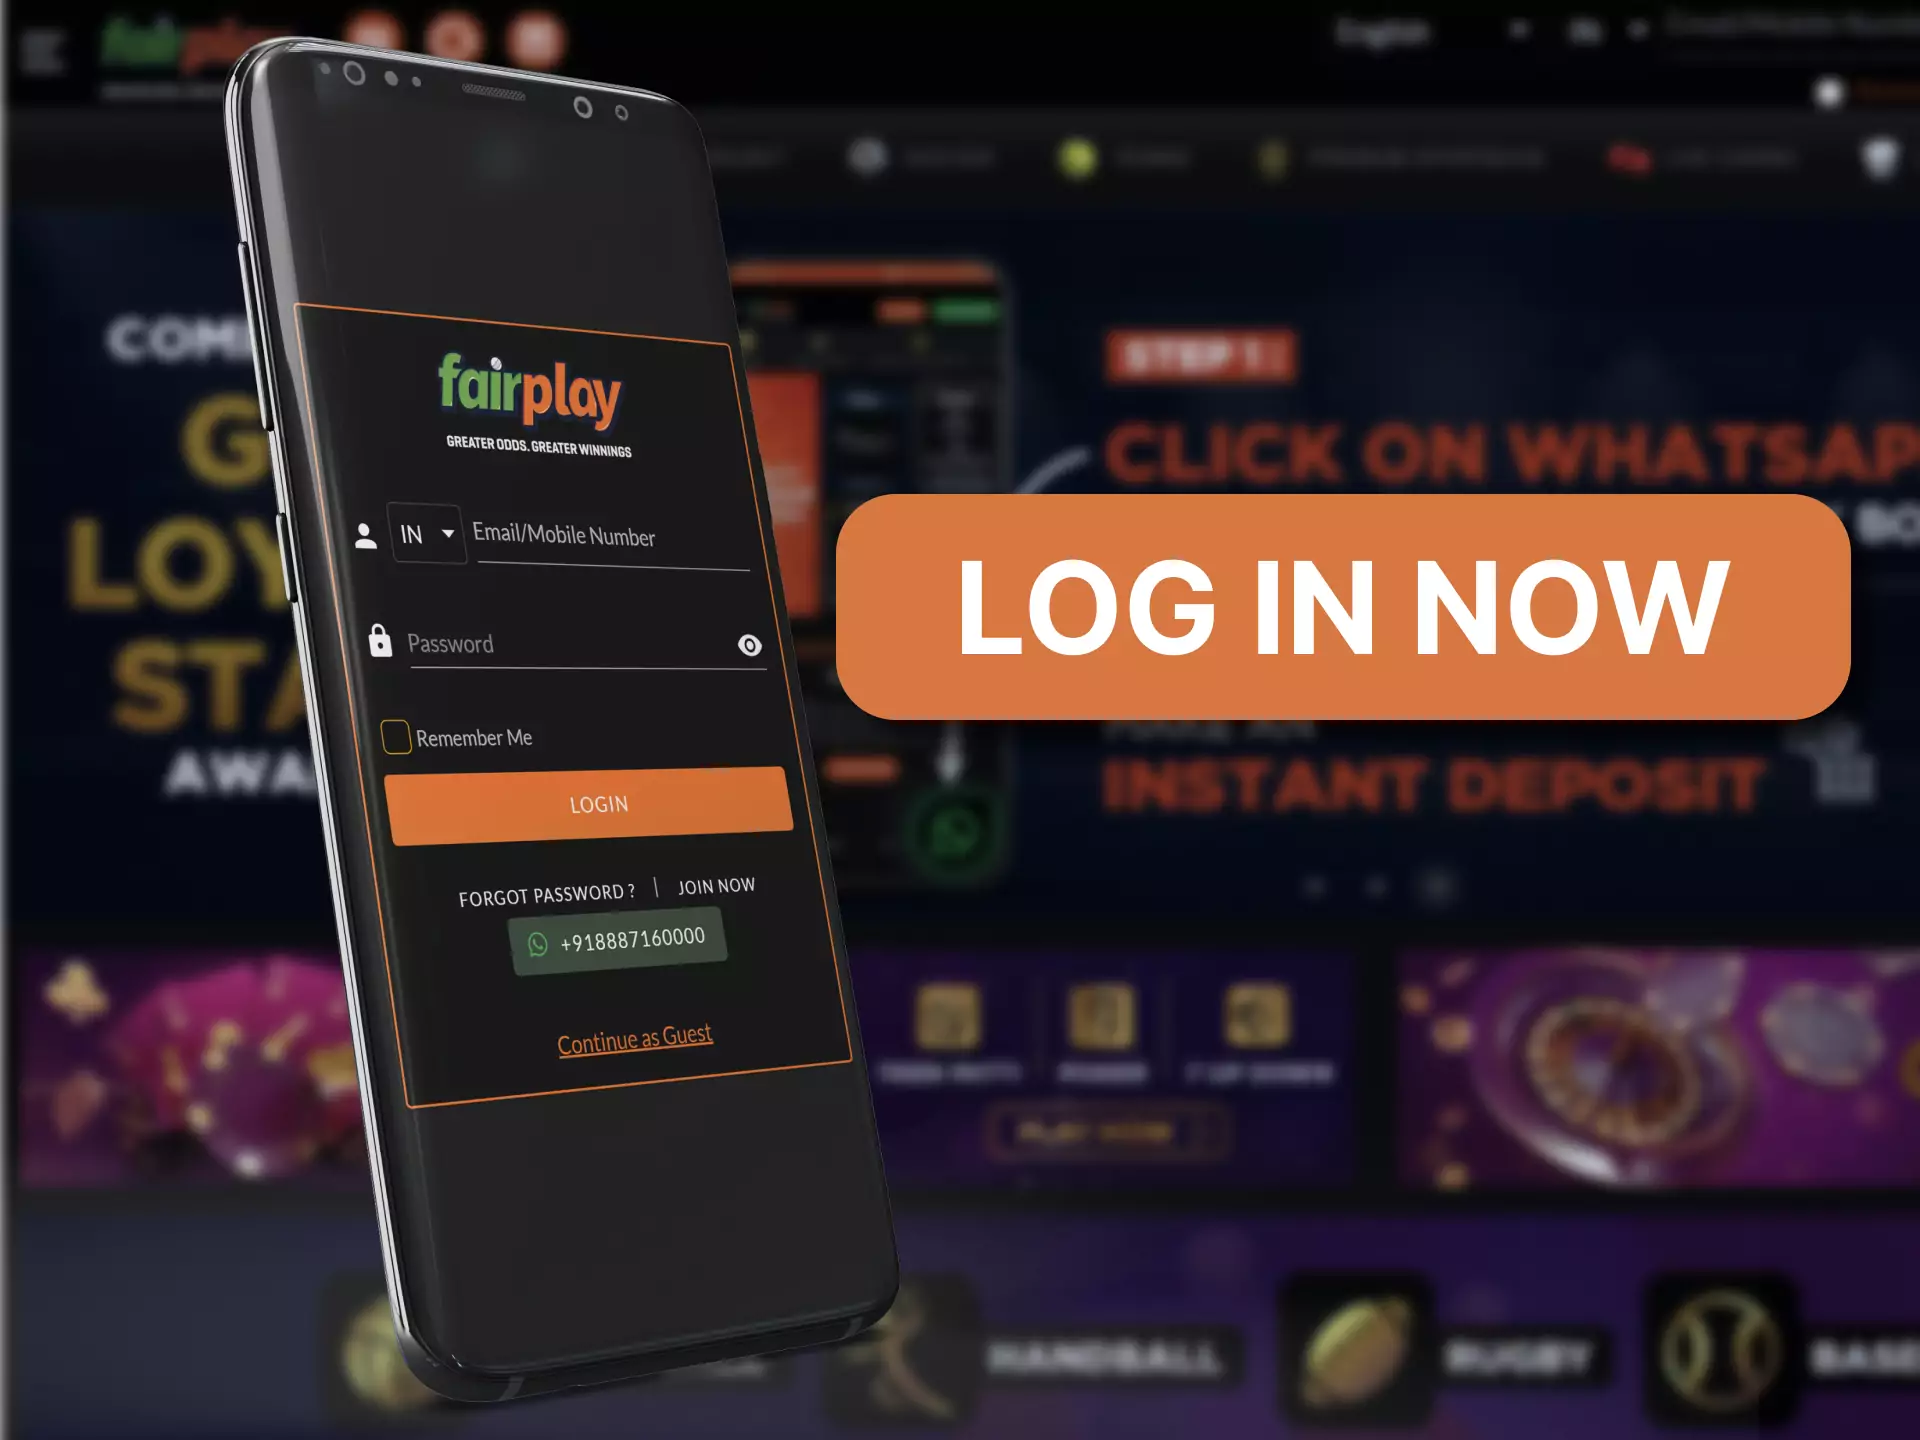 Log in to your account on the Fairplay mobile app.